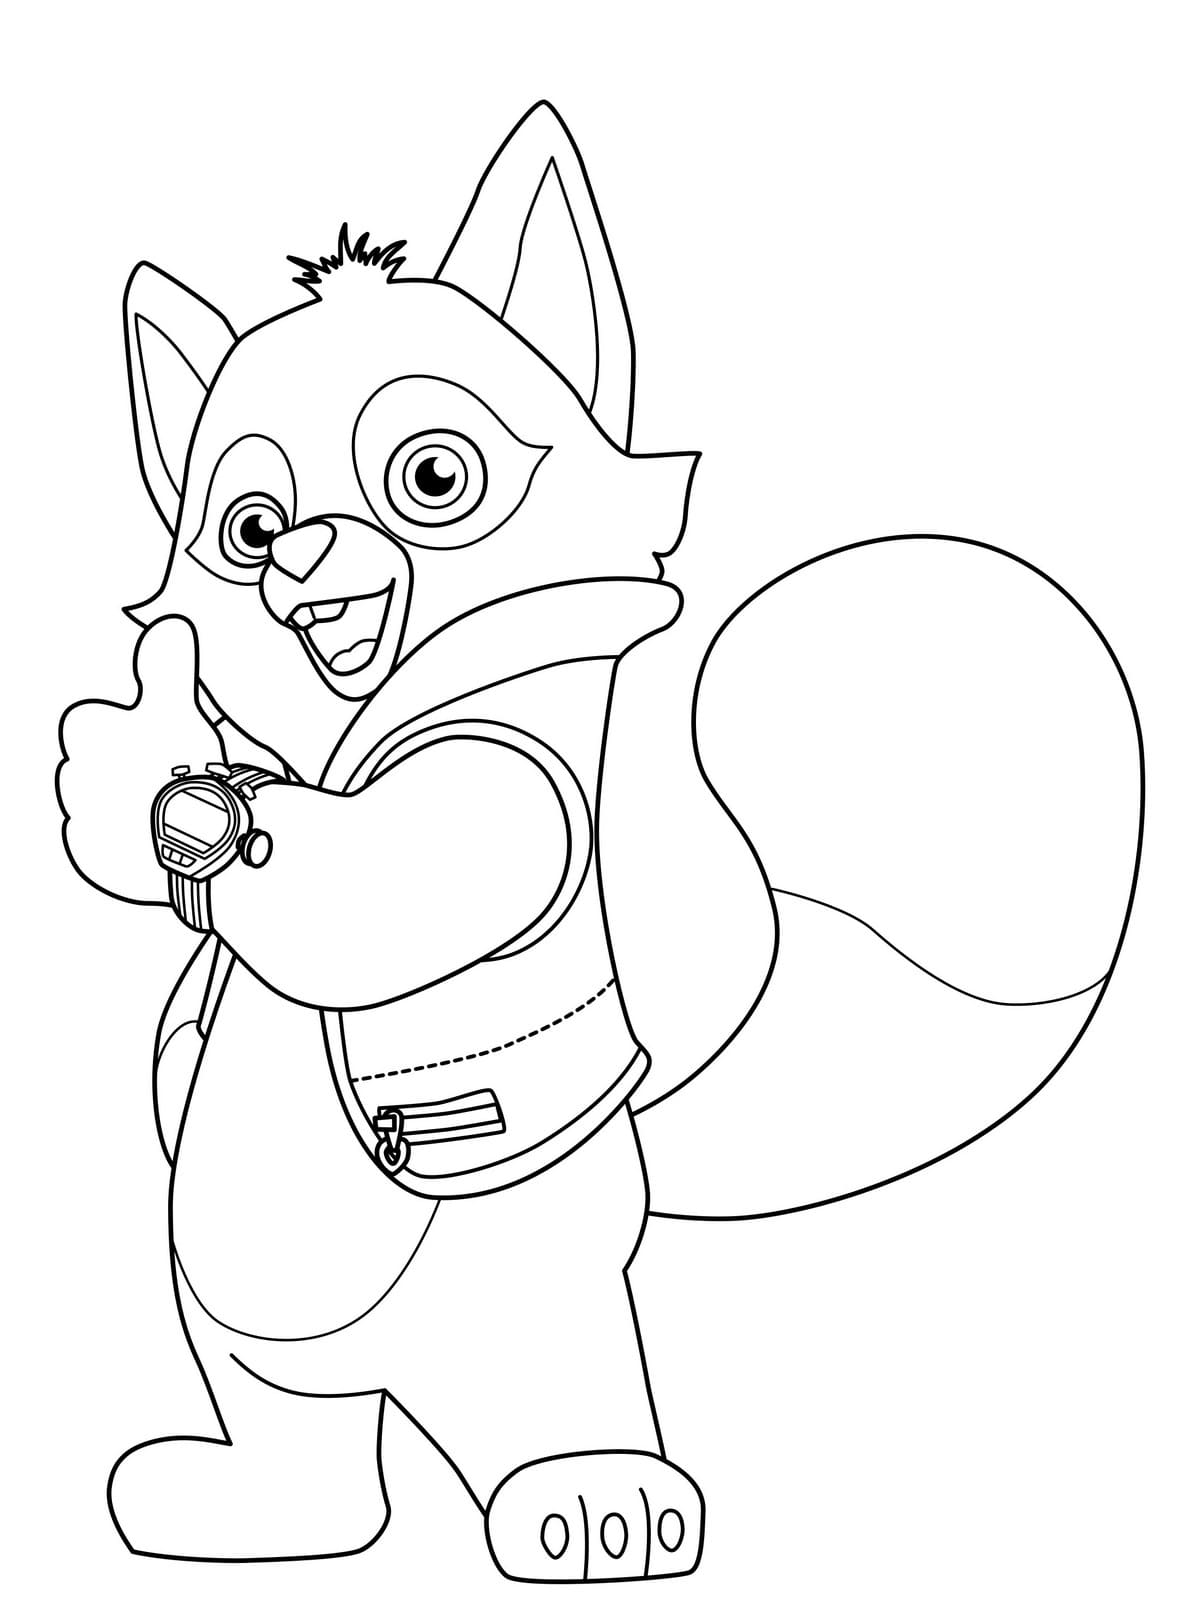 Special Agent Oso Coloring Pages | WONDER DAY — Coloring pages for children  and adults